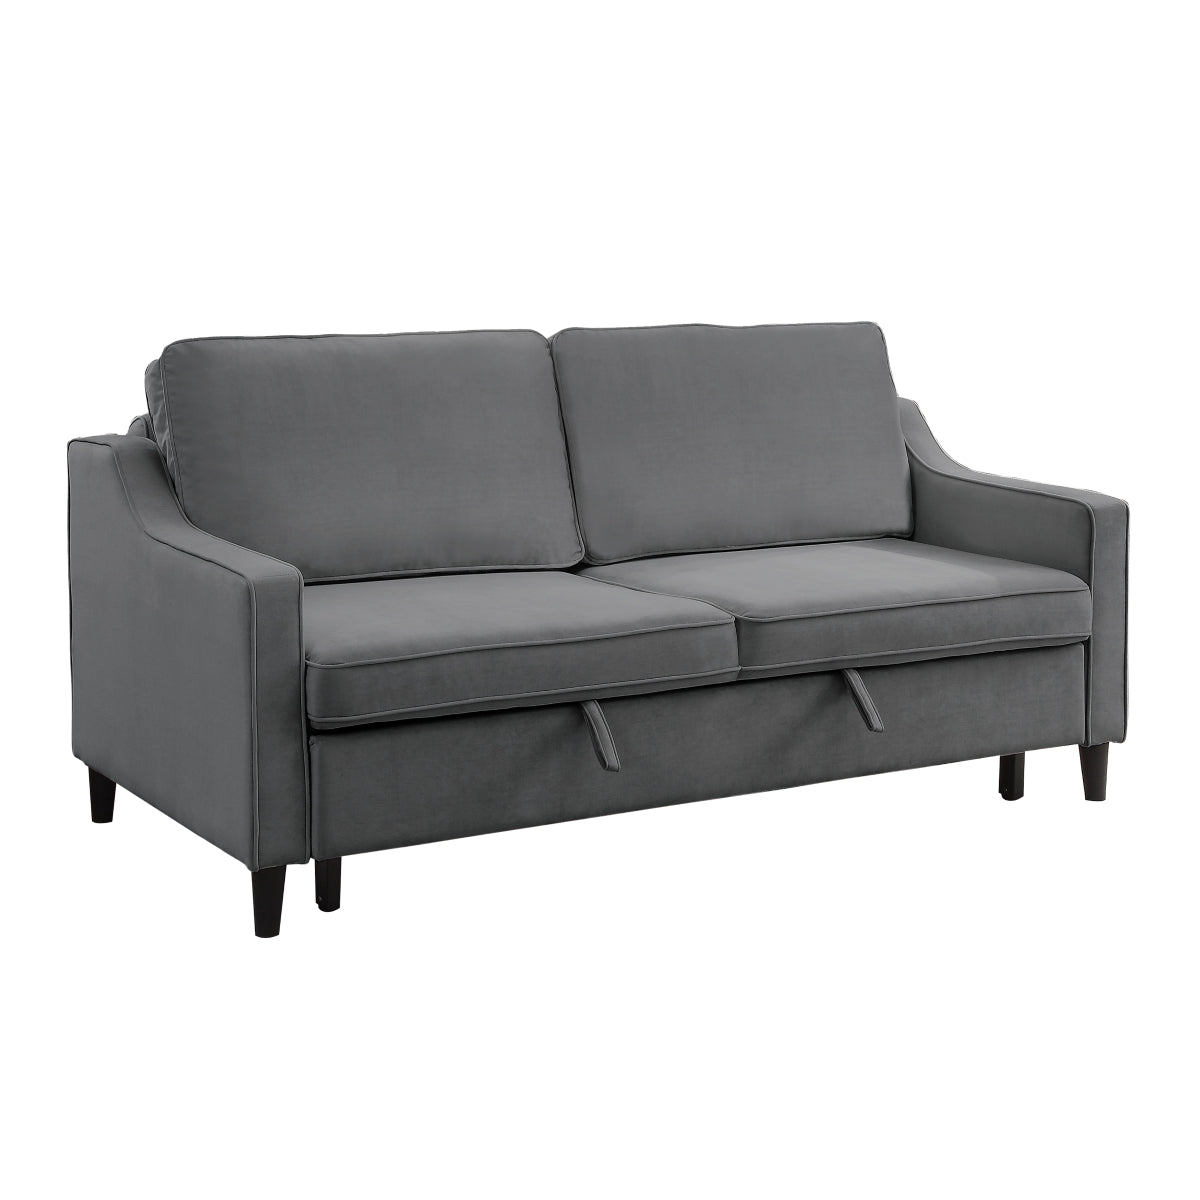 Adelia Dark Gray Velvet Convertible Studio Sofa with Pull-out Bed